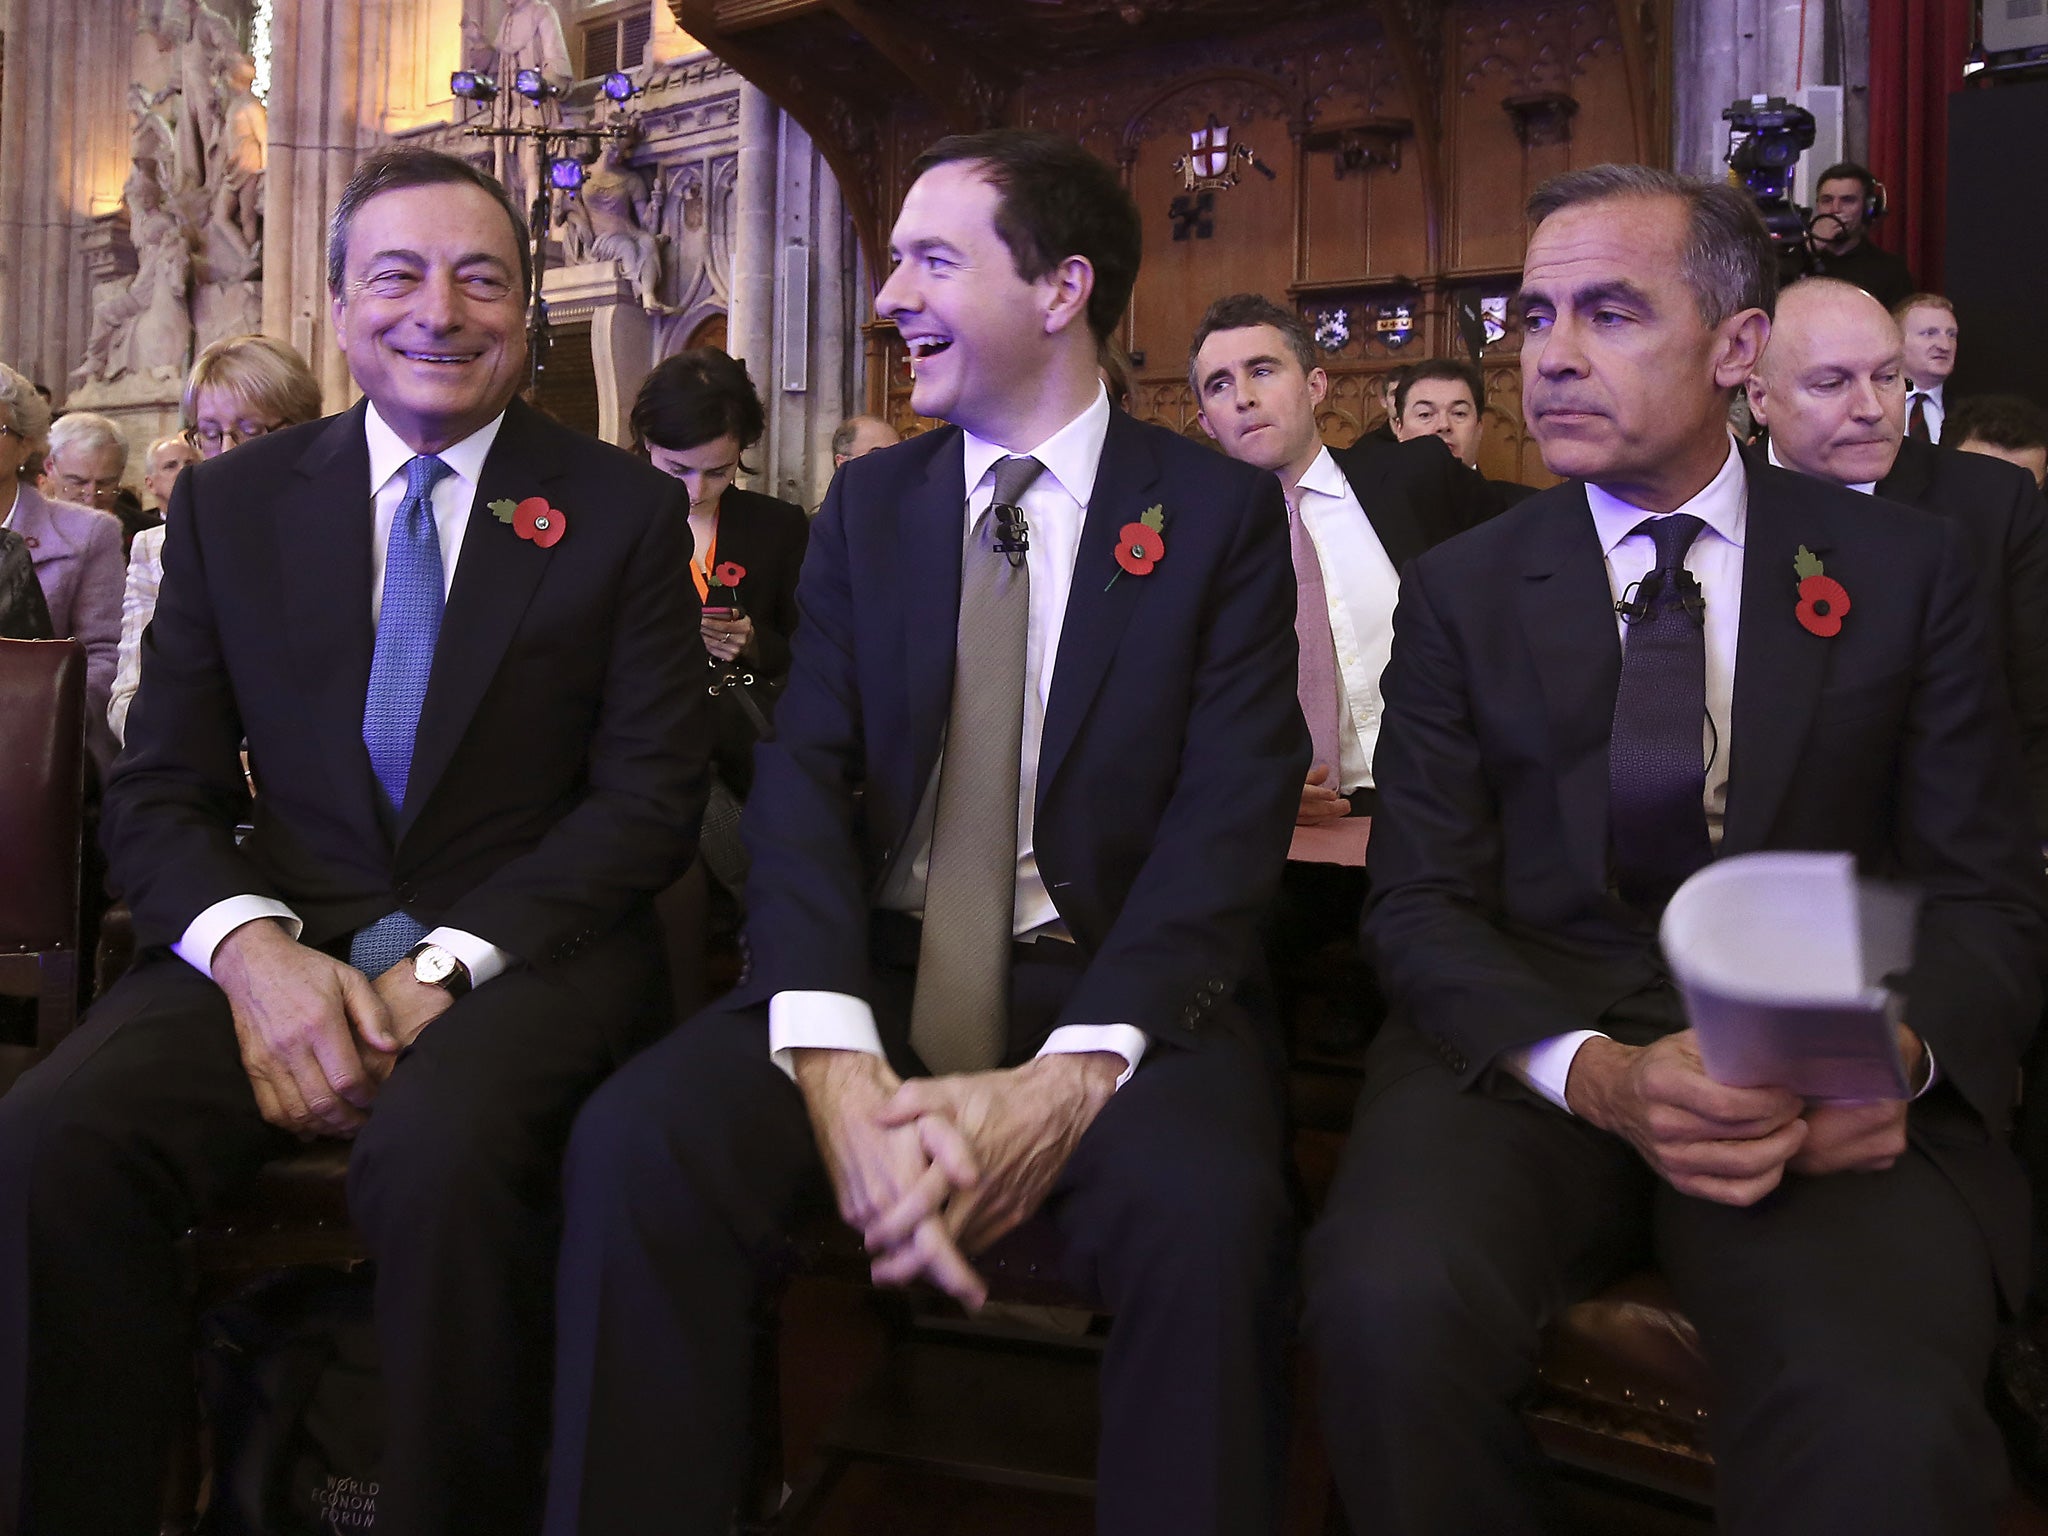 President of the European Central bank Mario Draghi, Chancellor George Osborne and the Bank of England governor Mark Carney at the Bank of England Open Forum 2015 at Guildhall in London.